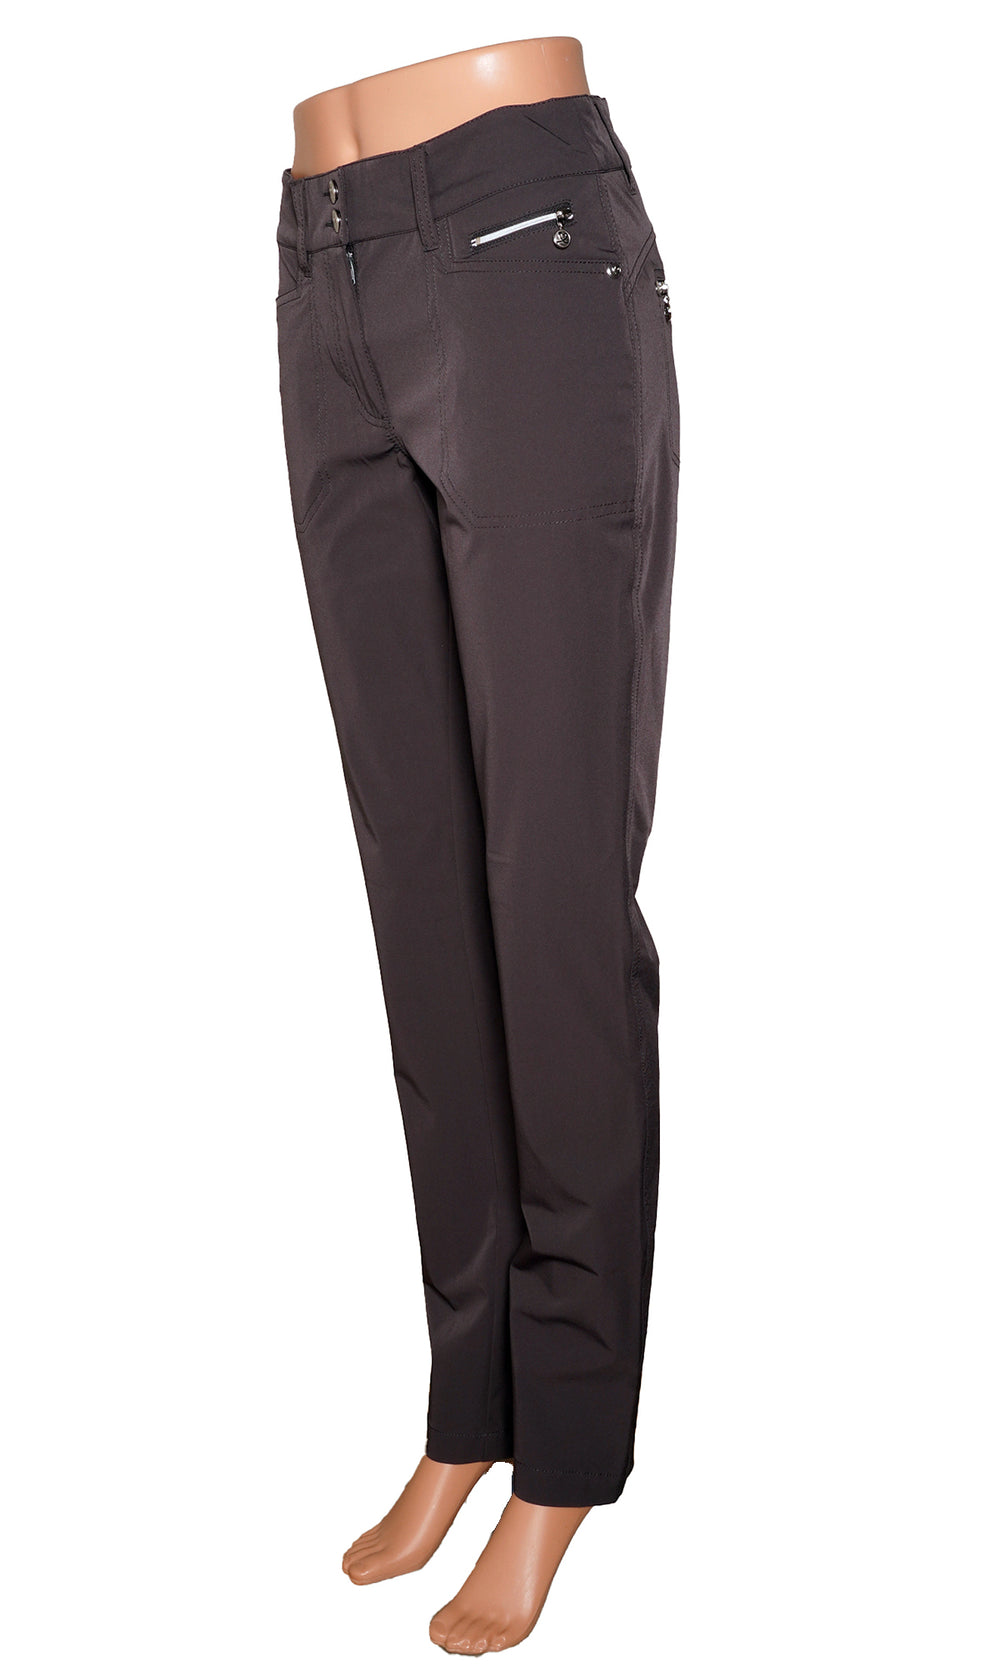 Daily Sports Miracle Pants - Grey - Size 2 - Skorzie